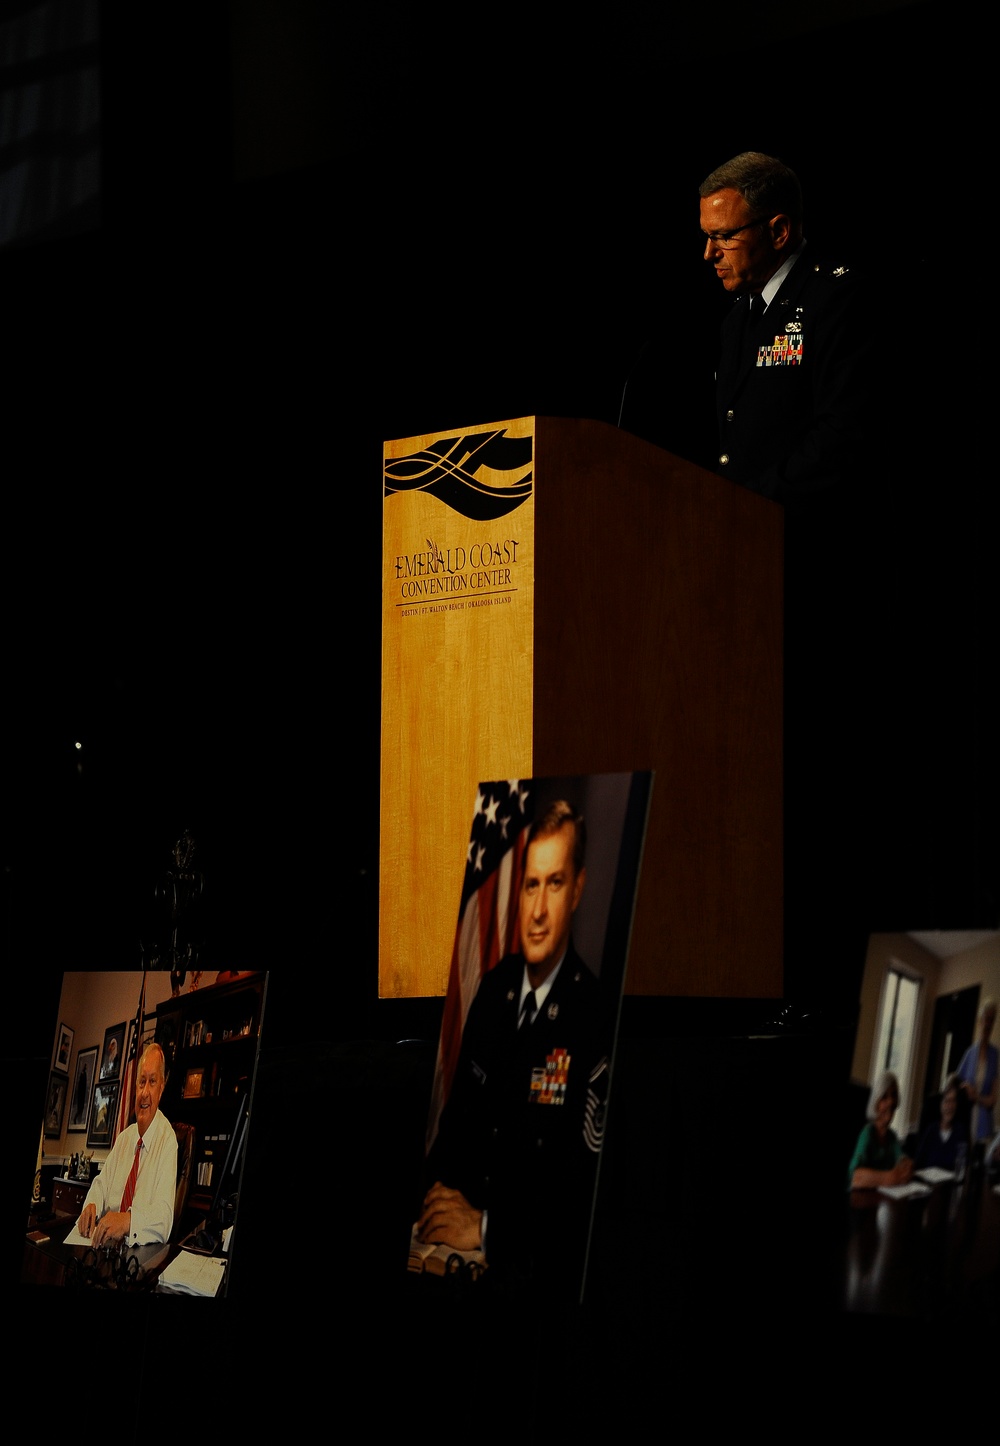 Chief Master Sgt. of the Air Force #9 James C. Binnicker’s celebration of life ceremony